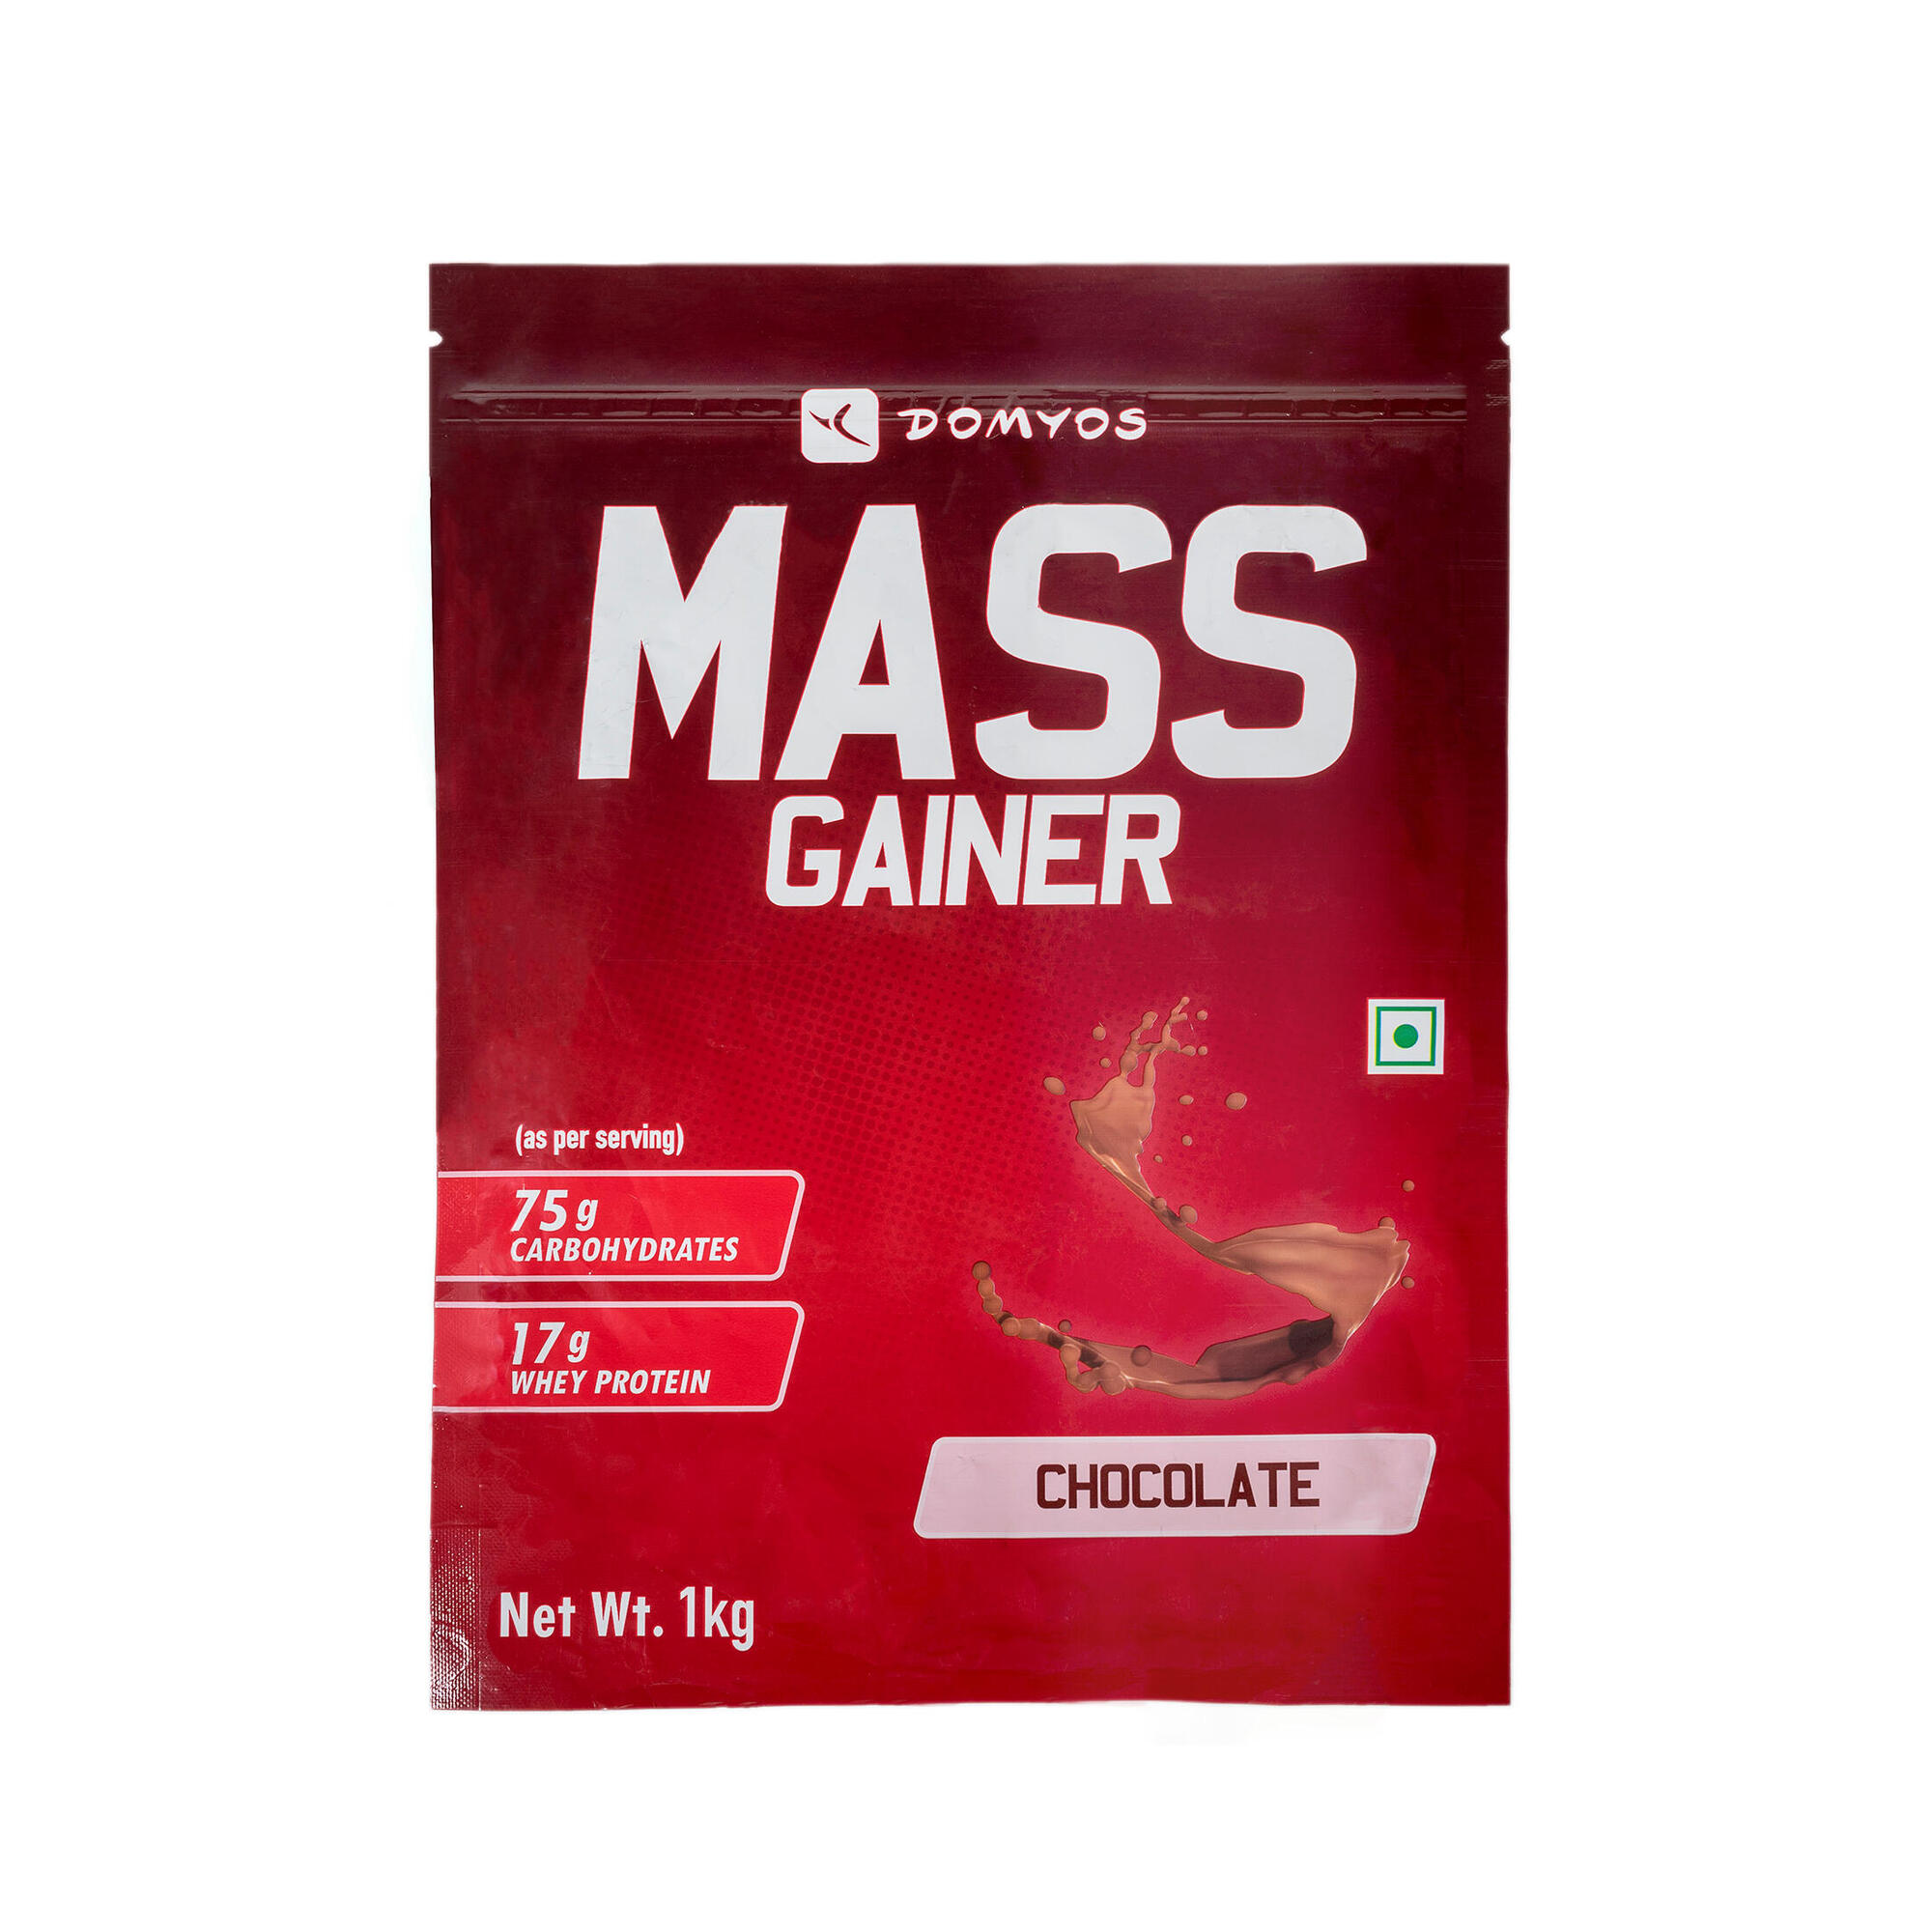 Mass Gainer 1Kg - Chocolate | Domyos by 